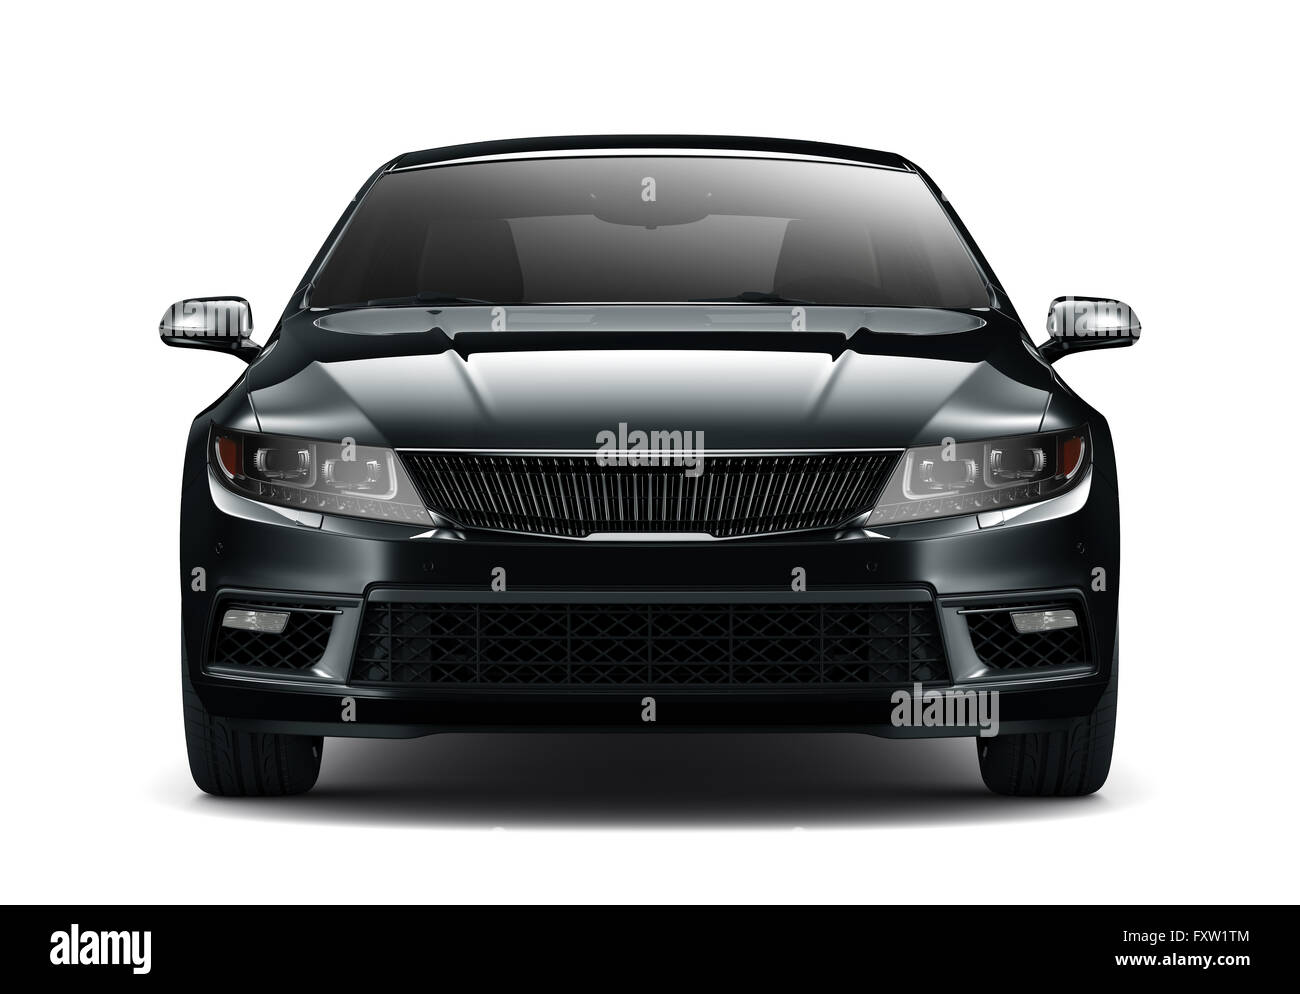 Black generic car - front view Stock Photo